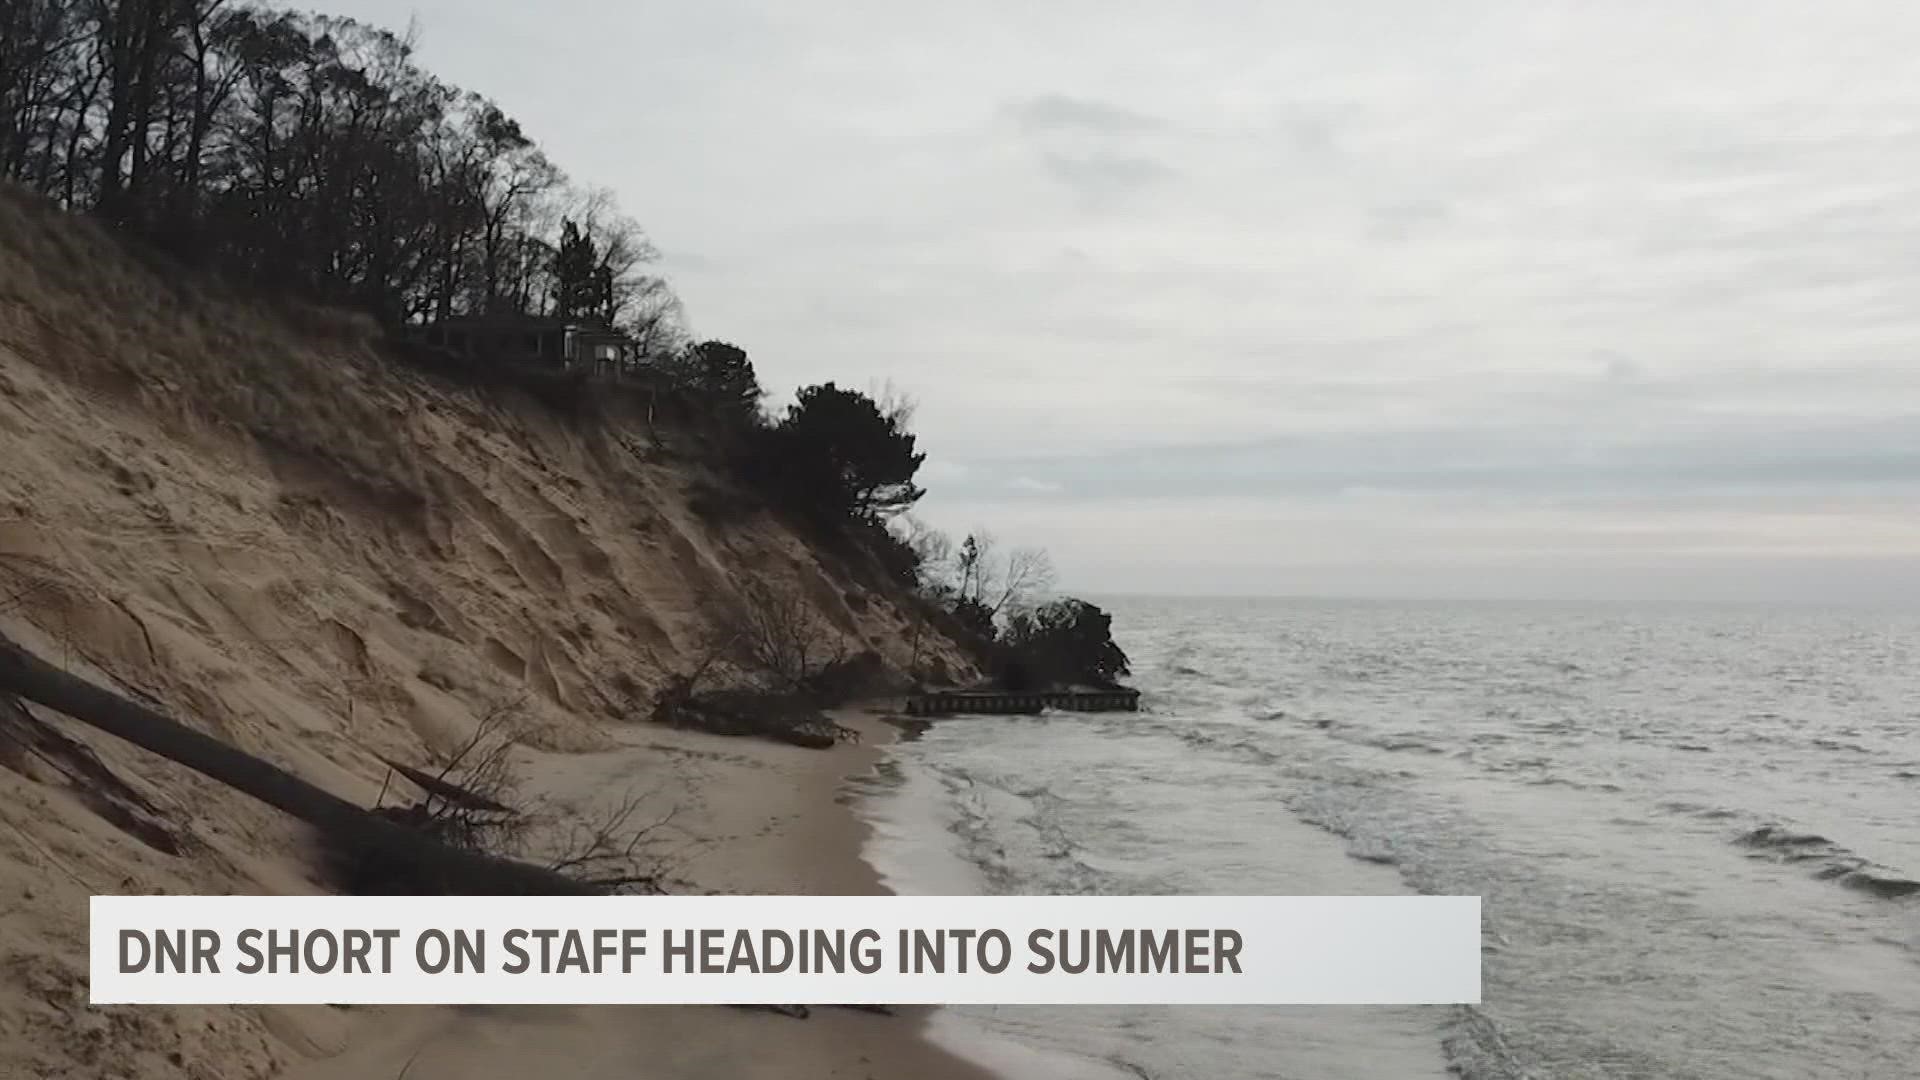 The DNR typically likes to have more than 1,300 seasonal employees during peak visiting months to Michigan state parks.